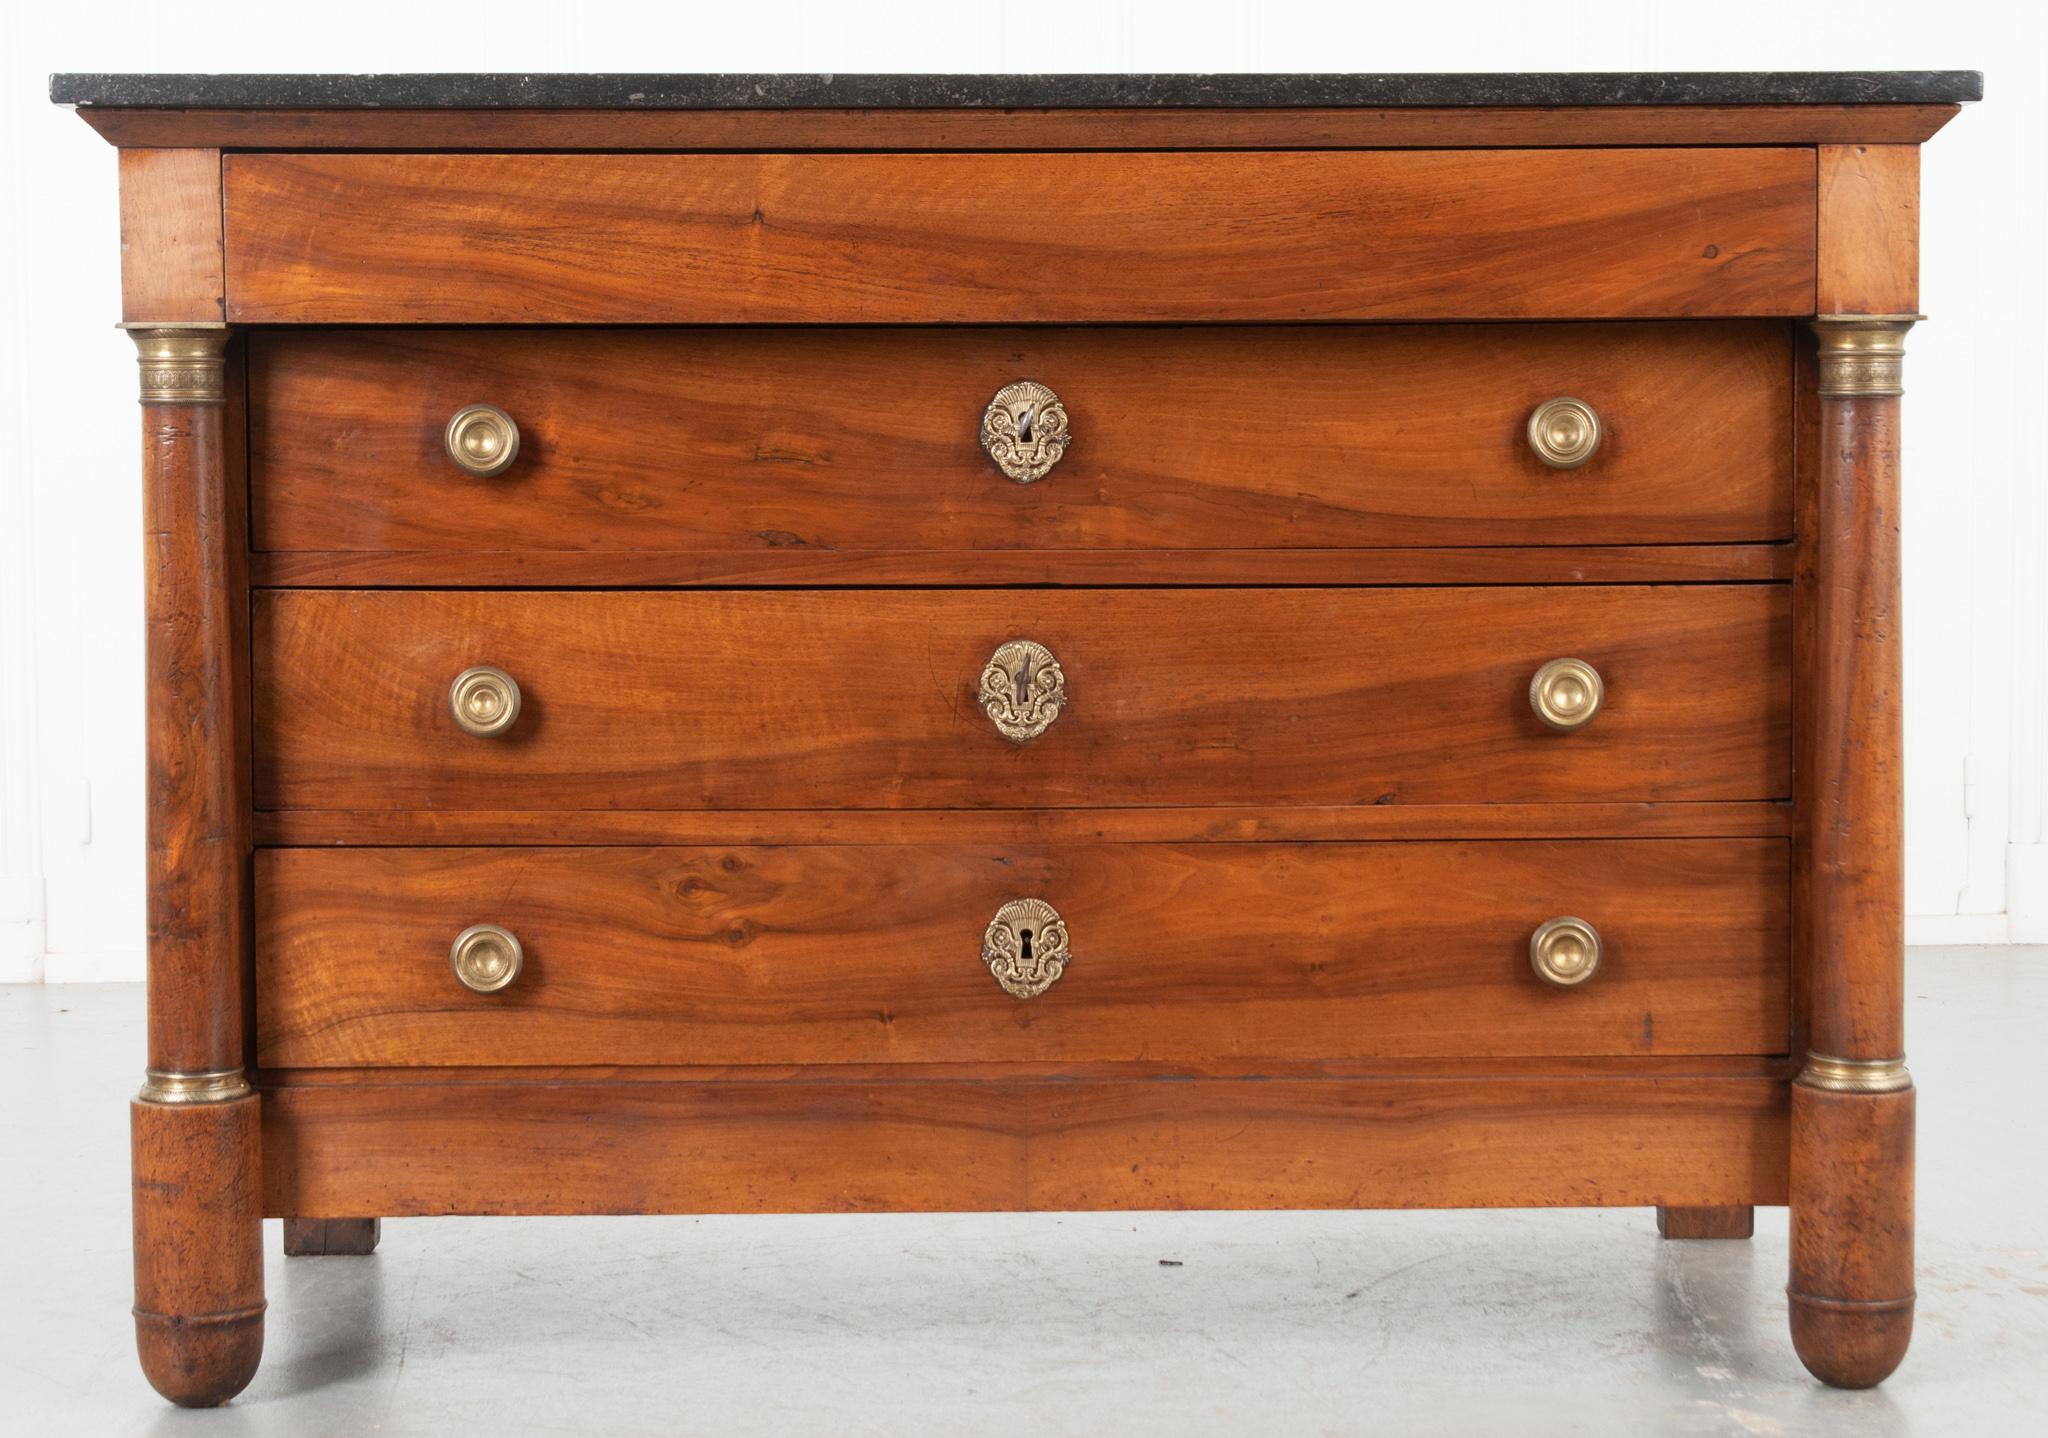 This is a fine French Empire style commode made of solid walnut. Topped by a beautiful piece of black marble with fascinating fossil inclusions, the body is made of solid walnut. A hidden drawer without hardware, sits flush at the top of the